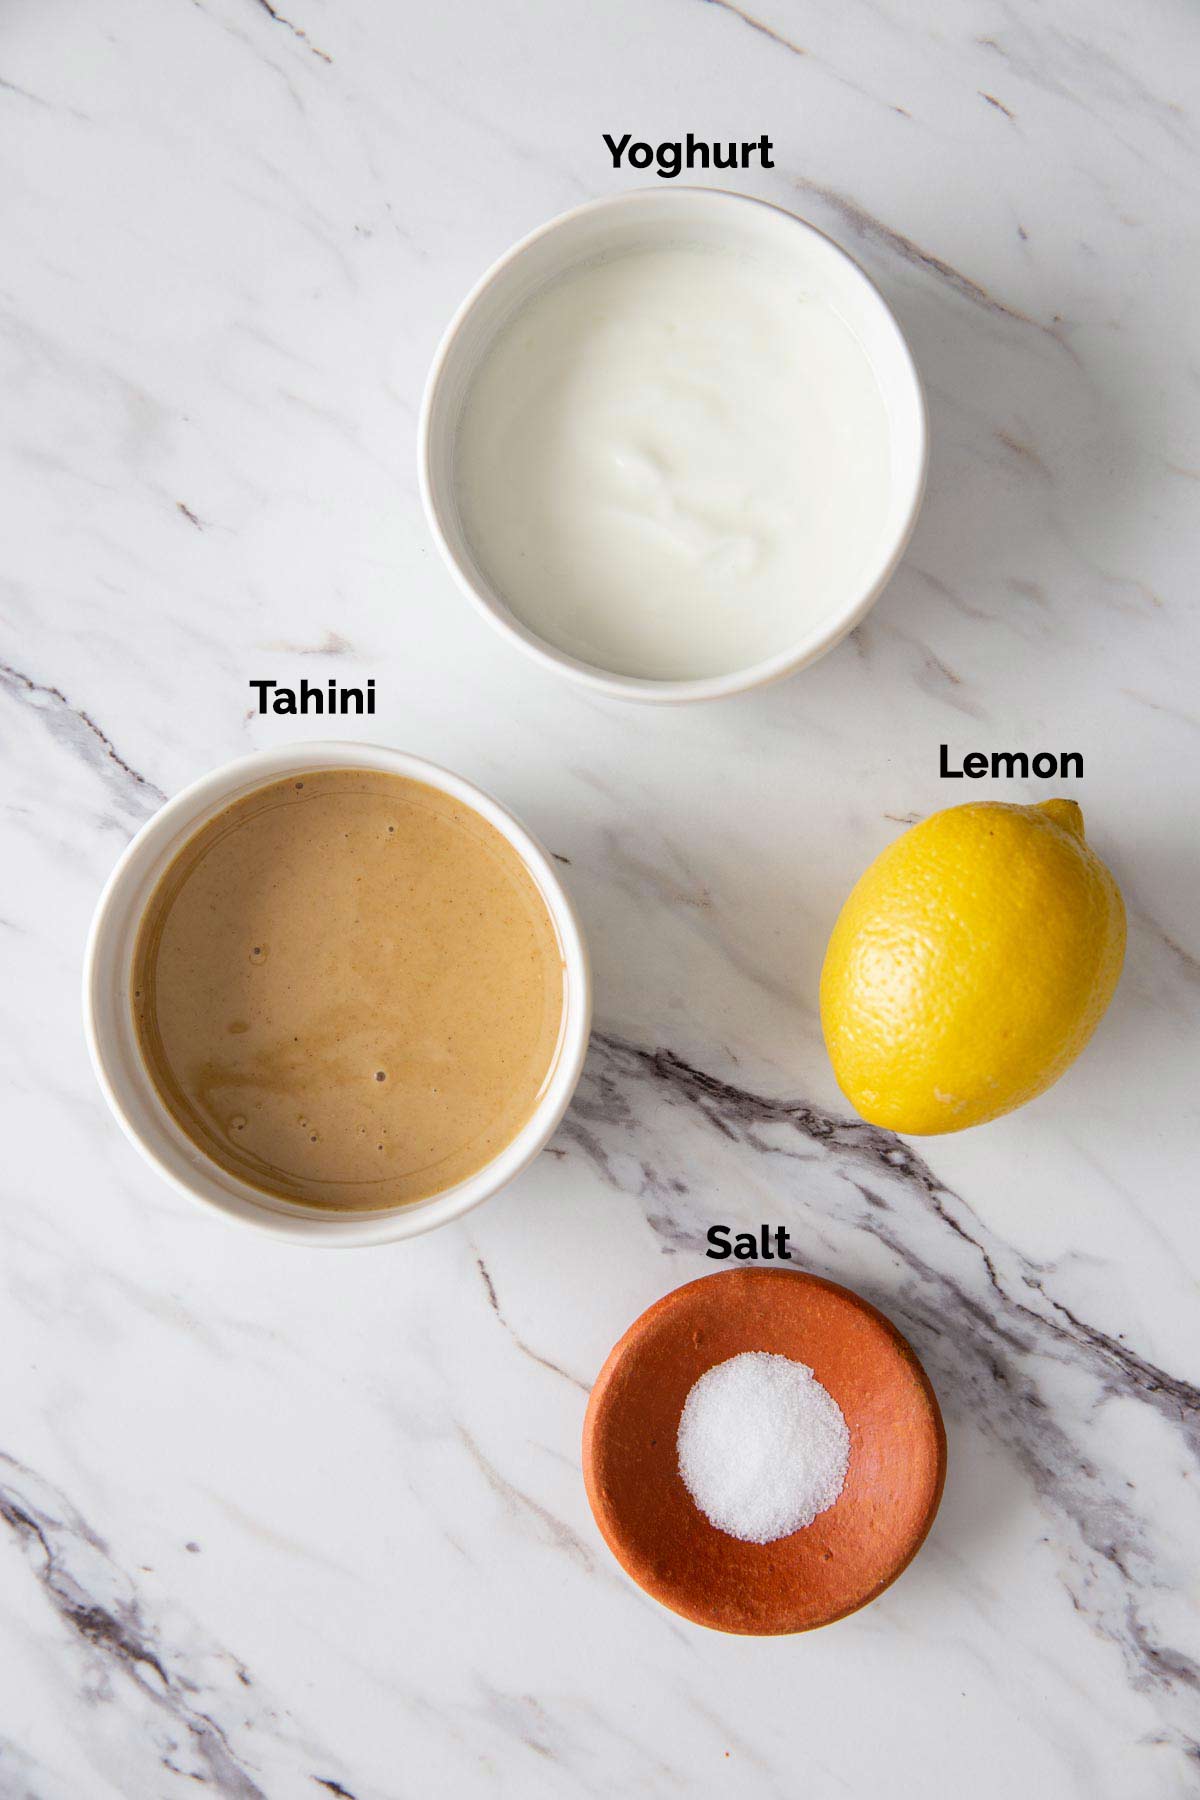 Ingredients to prepare tahini sauce for turmeric roasted cauliflower are laid on a flat surface.